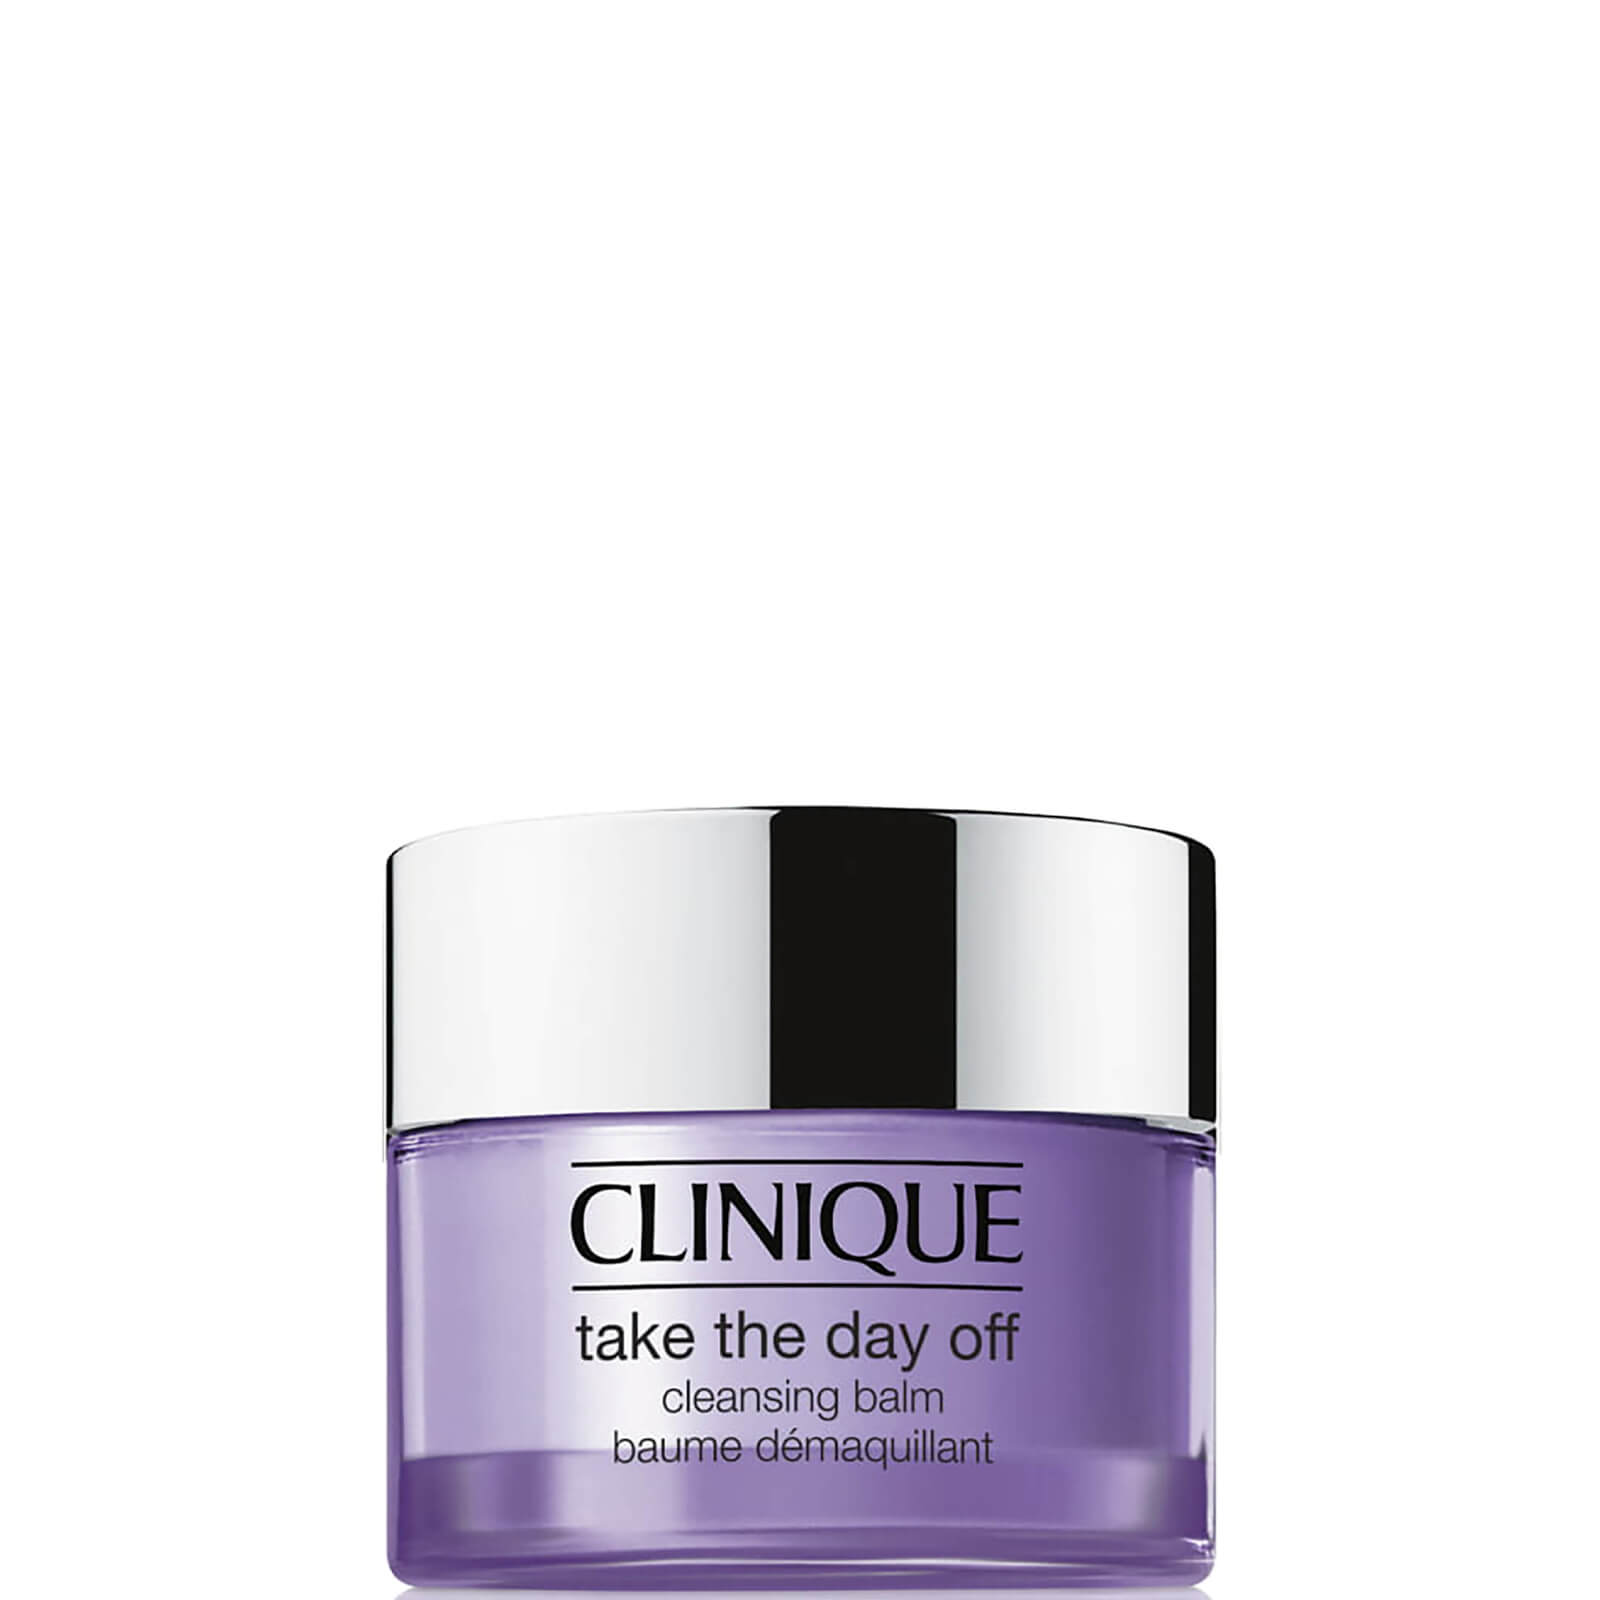 Take the day off cleansing. Clinique take the Day off Cleansing Balm. Clinique средство для снятия стойкого макияжа take the Day off, 50 мл. Clinique take the Day off Cleansing Balm Baume. Clinique take the Day off Cleansing Balm Baume Demaquillant.